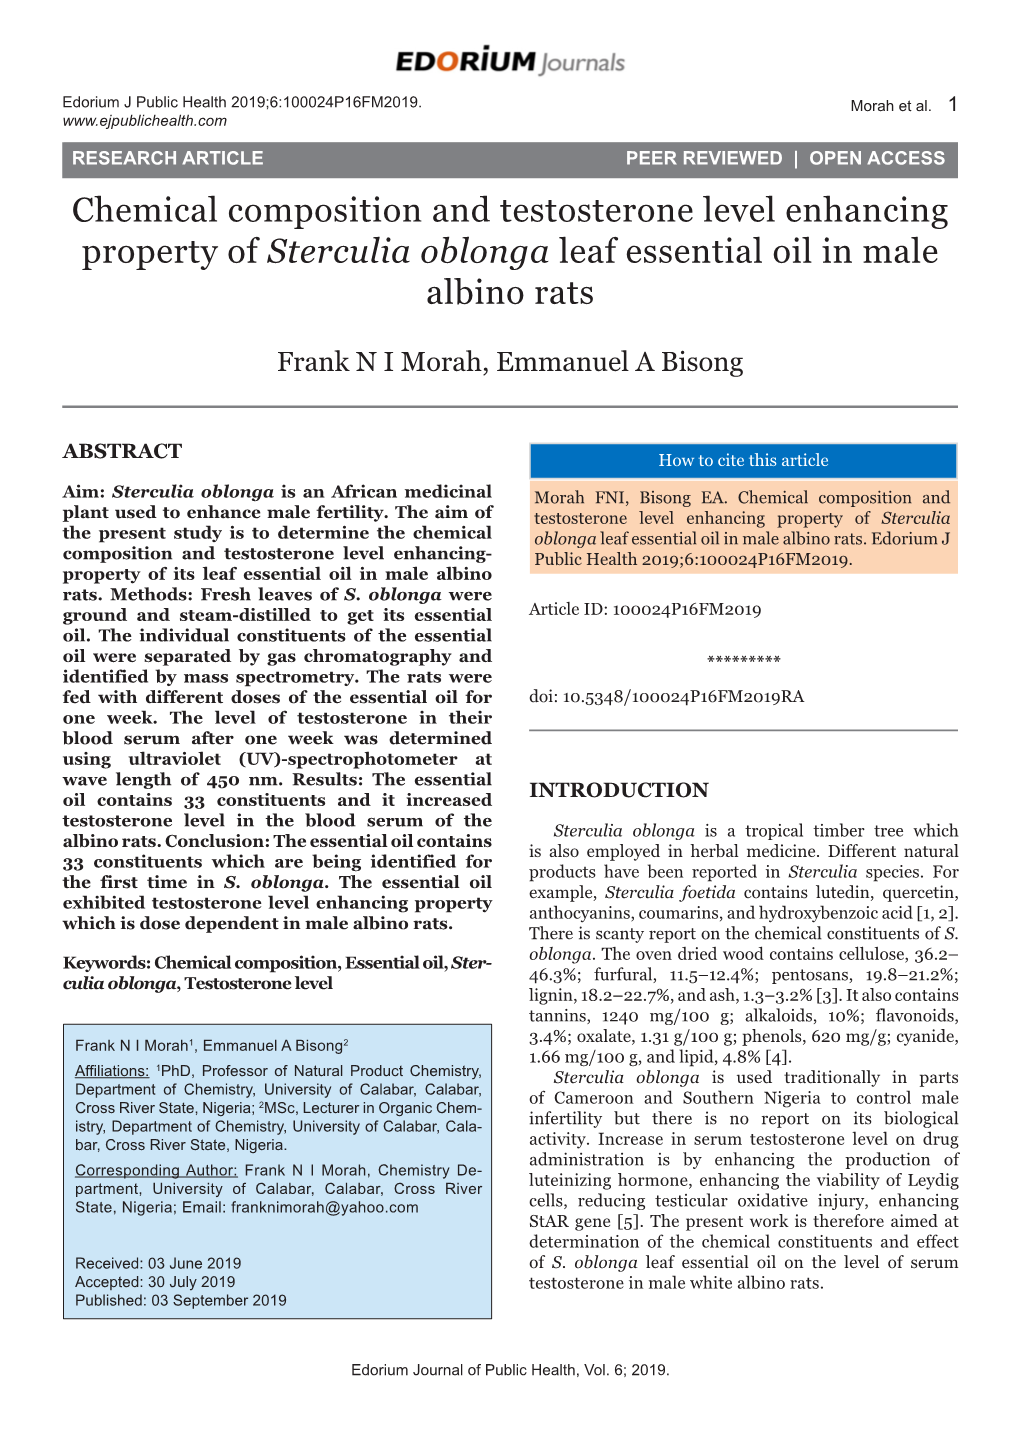 Chemical Composition and Testosterone Level Enhancing Property of Sterculia Oblonga Leaf Essential Oil in Male Albino Rats